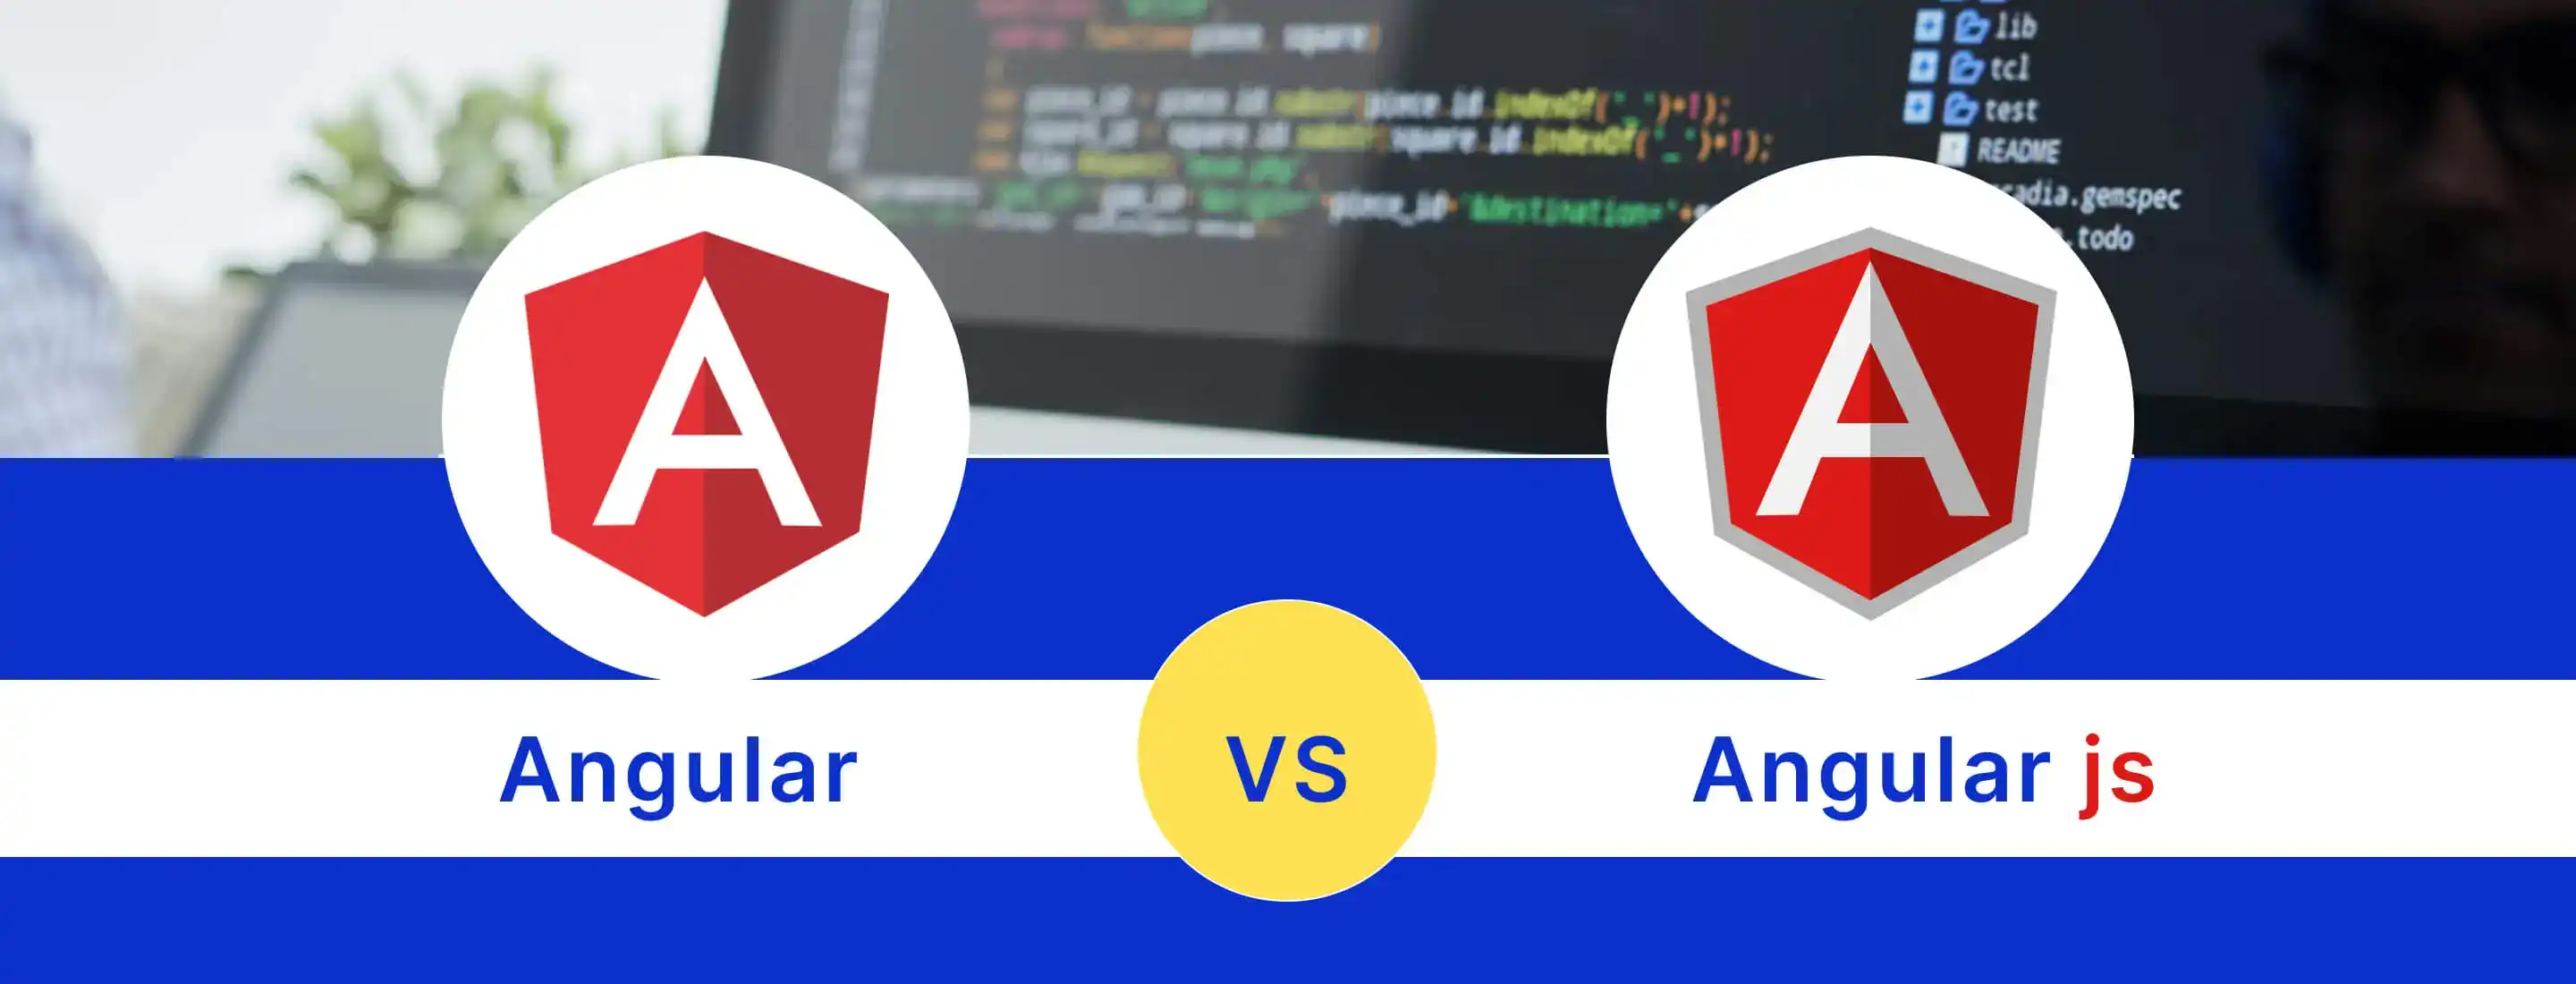 Angular vs Angular.Js: Which Is Better To Build Scalable Project?